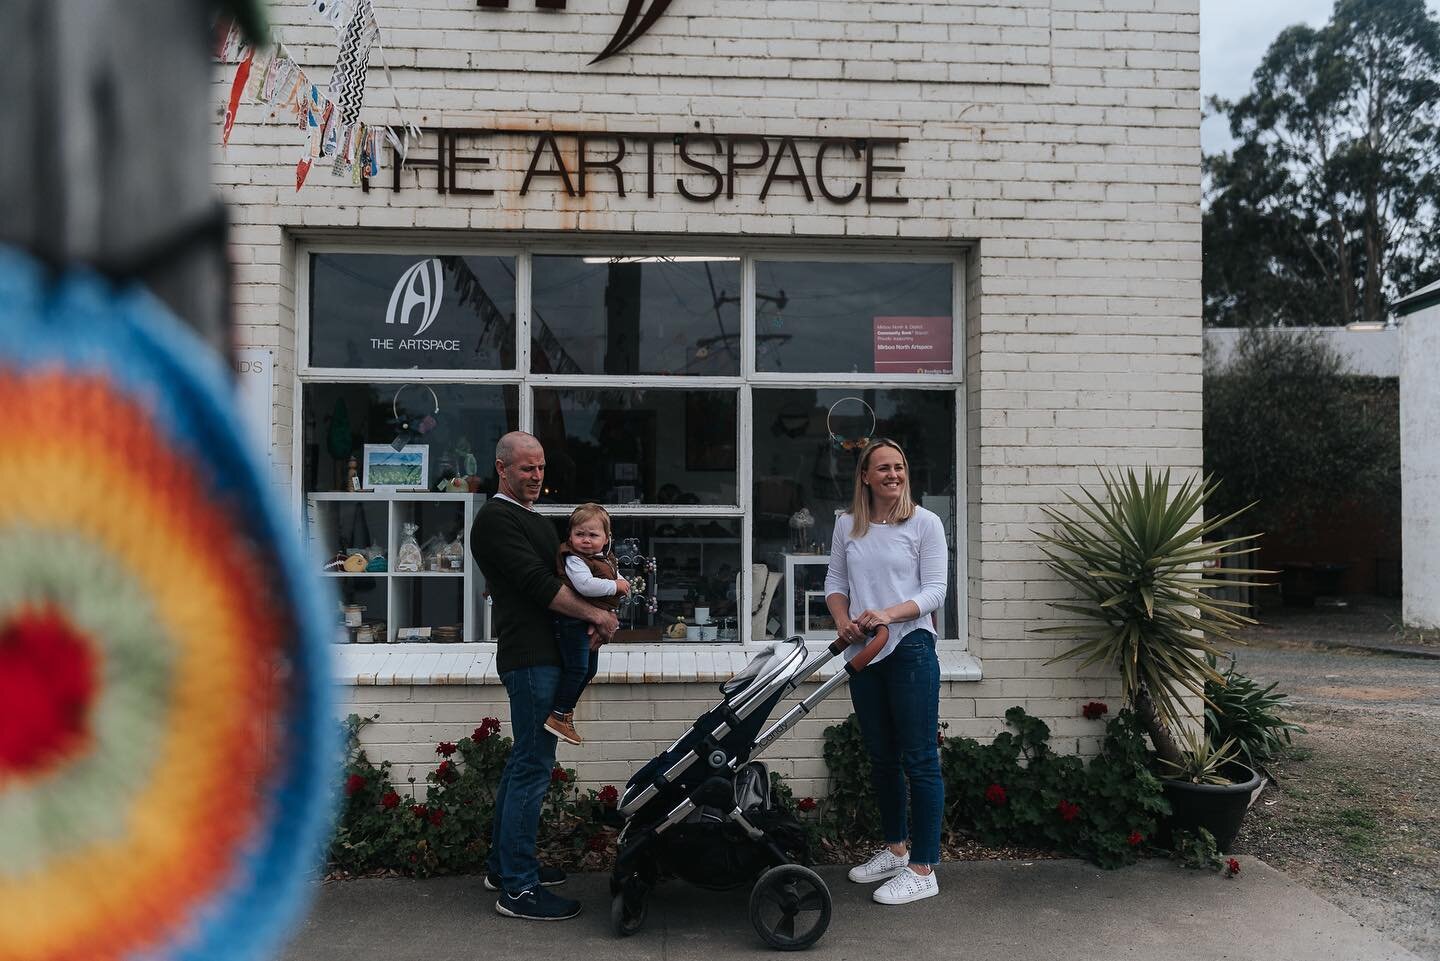 The Artspace.
⠀⠀⠀⠀⠀⠀⠀⠀⠀
A creative space with wares from local artists including jewellery, clothing, sculpture, paintings and fine art.
⠀⠀⠀⠀⠀⠀⠀⠀⠀
Various workshops run throughout the seasons.
⠀⠀⠀⠀⠀⠀⠀⠀⠀
#visitmirboonorth